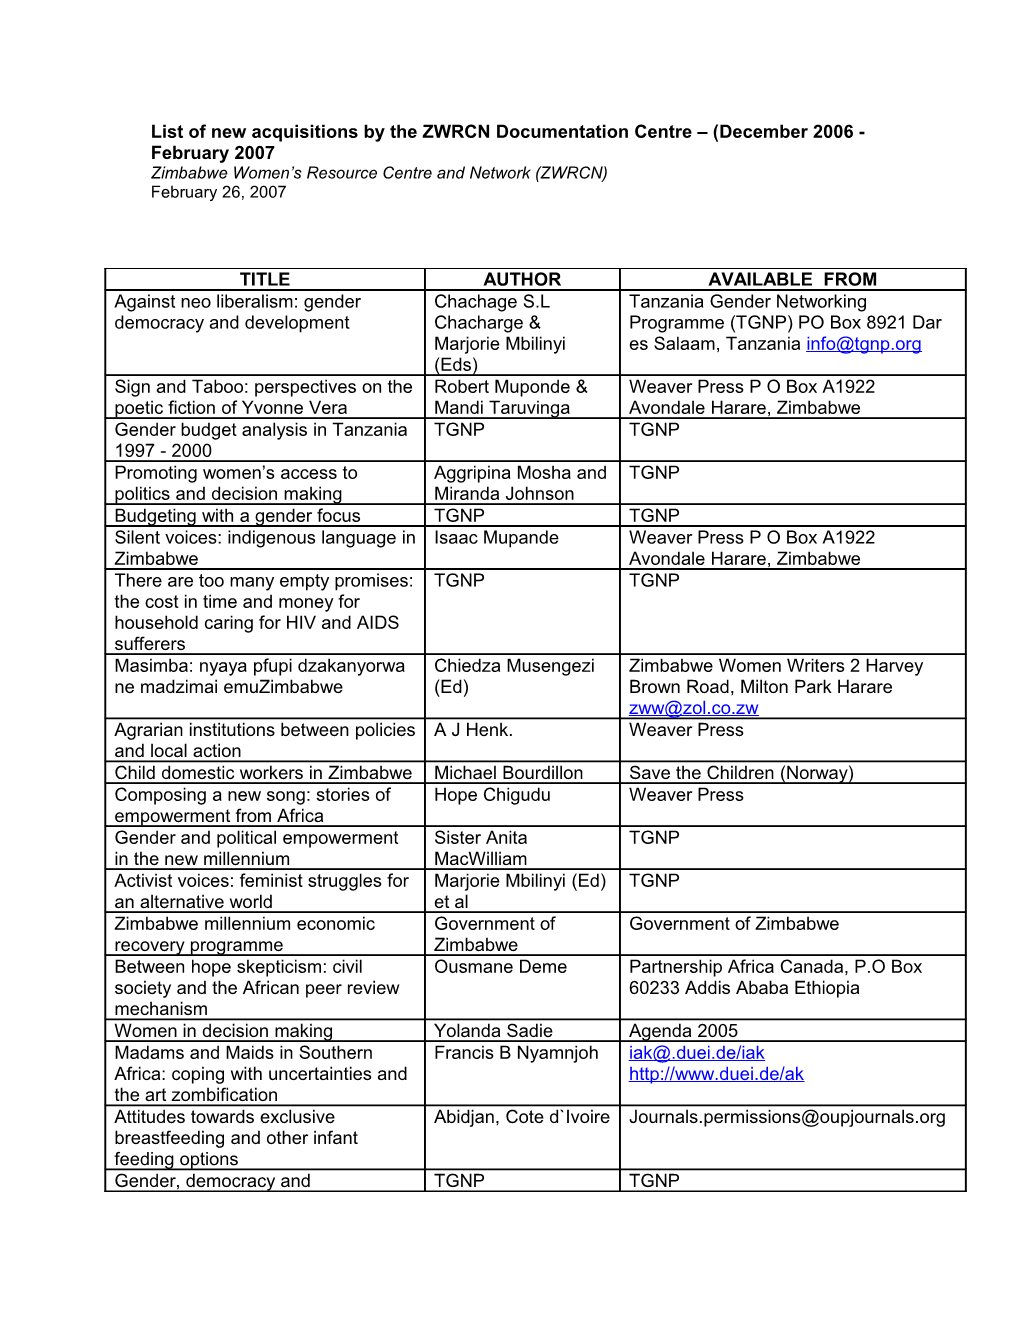 List of New Acquisitions by the ZWRCN Documentation Centre (December 2006 - February 2007